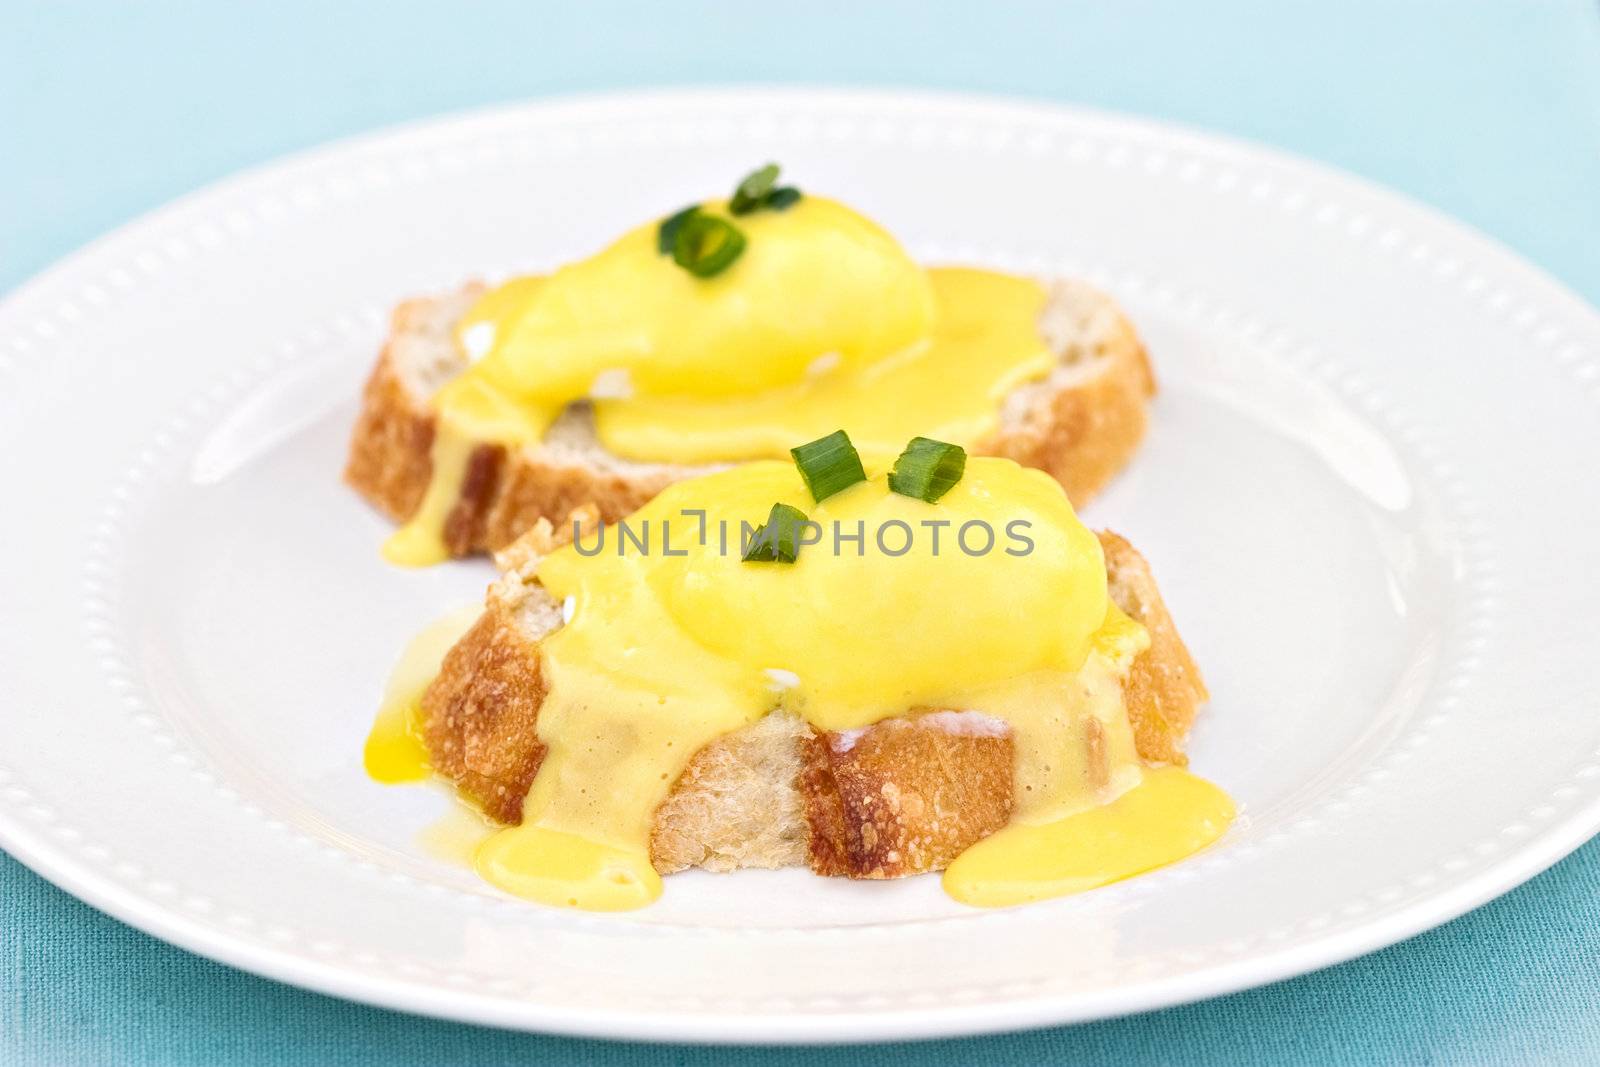 Eggs benedict by StephanieFrey